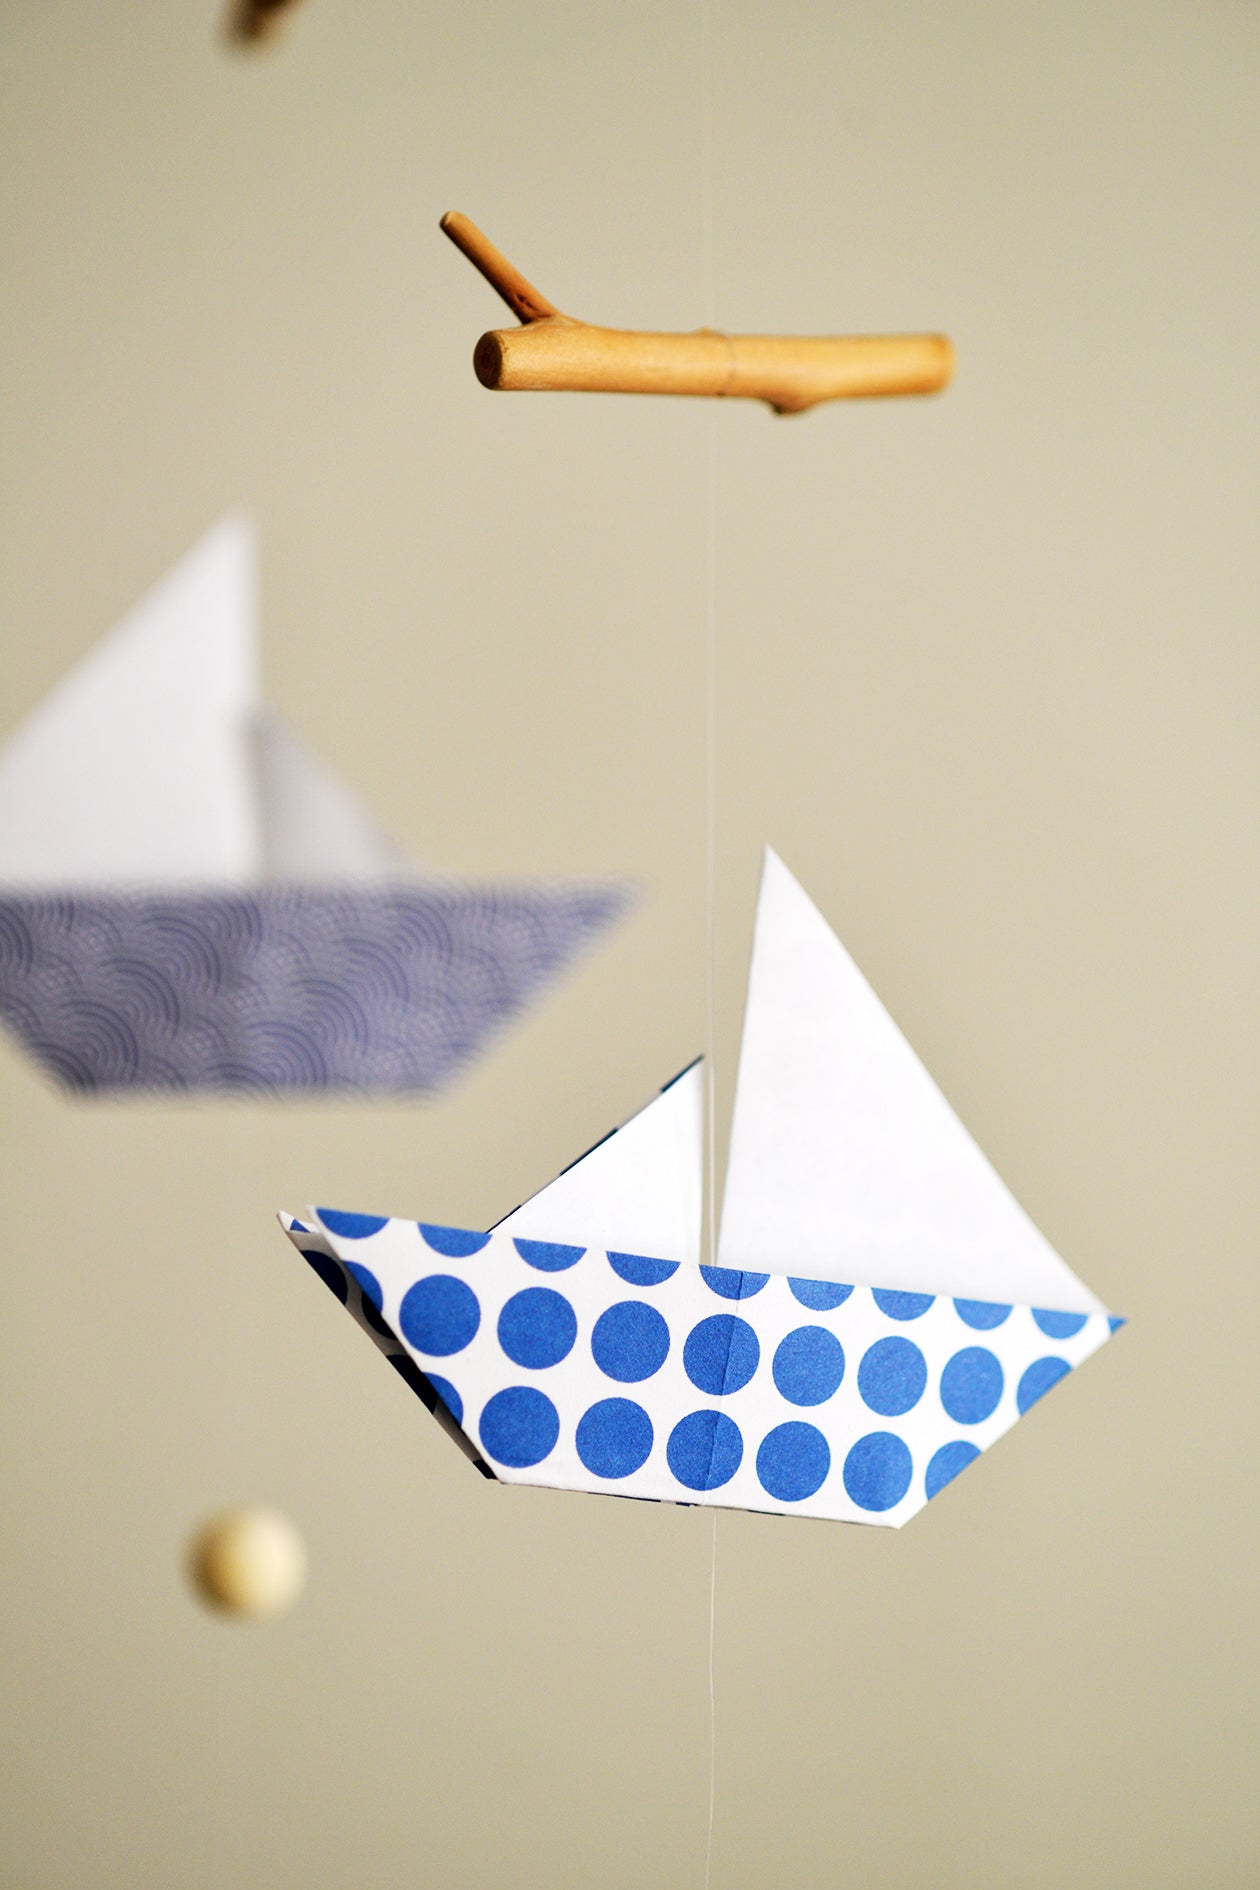 Origami baby mobile - Under the ocean